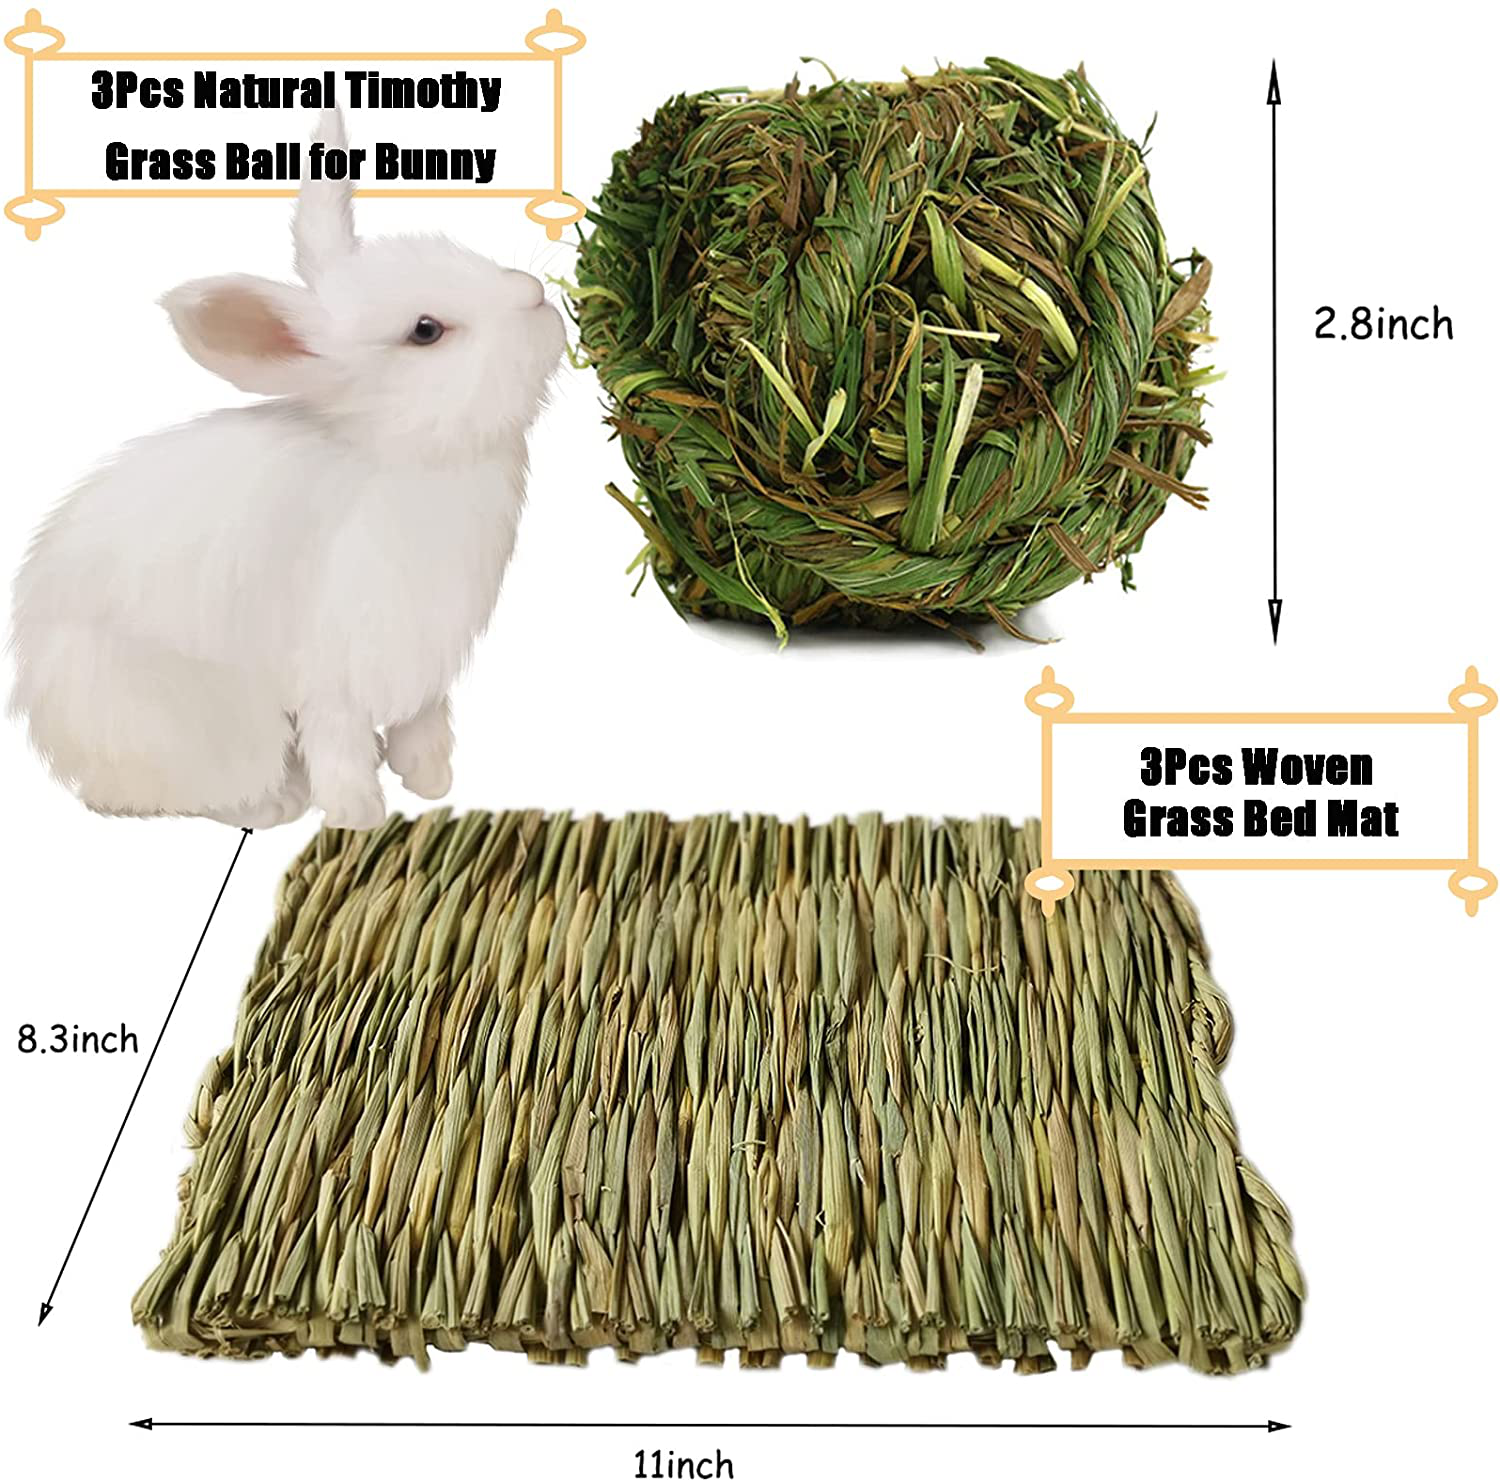 Hamiledyi 3Pcs Grass Mat Woven Bed Mat for Bunny 3Pcs Rabbit Chew Ball Timothy Grass Grinding Small Animal Bedding Nest Activity Play Chew Toys for Guinea Pig Gerbils Hamster Rat